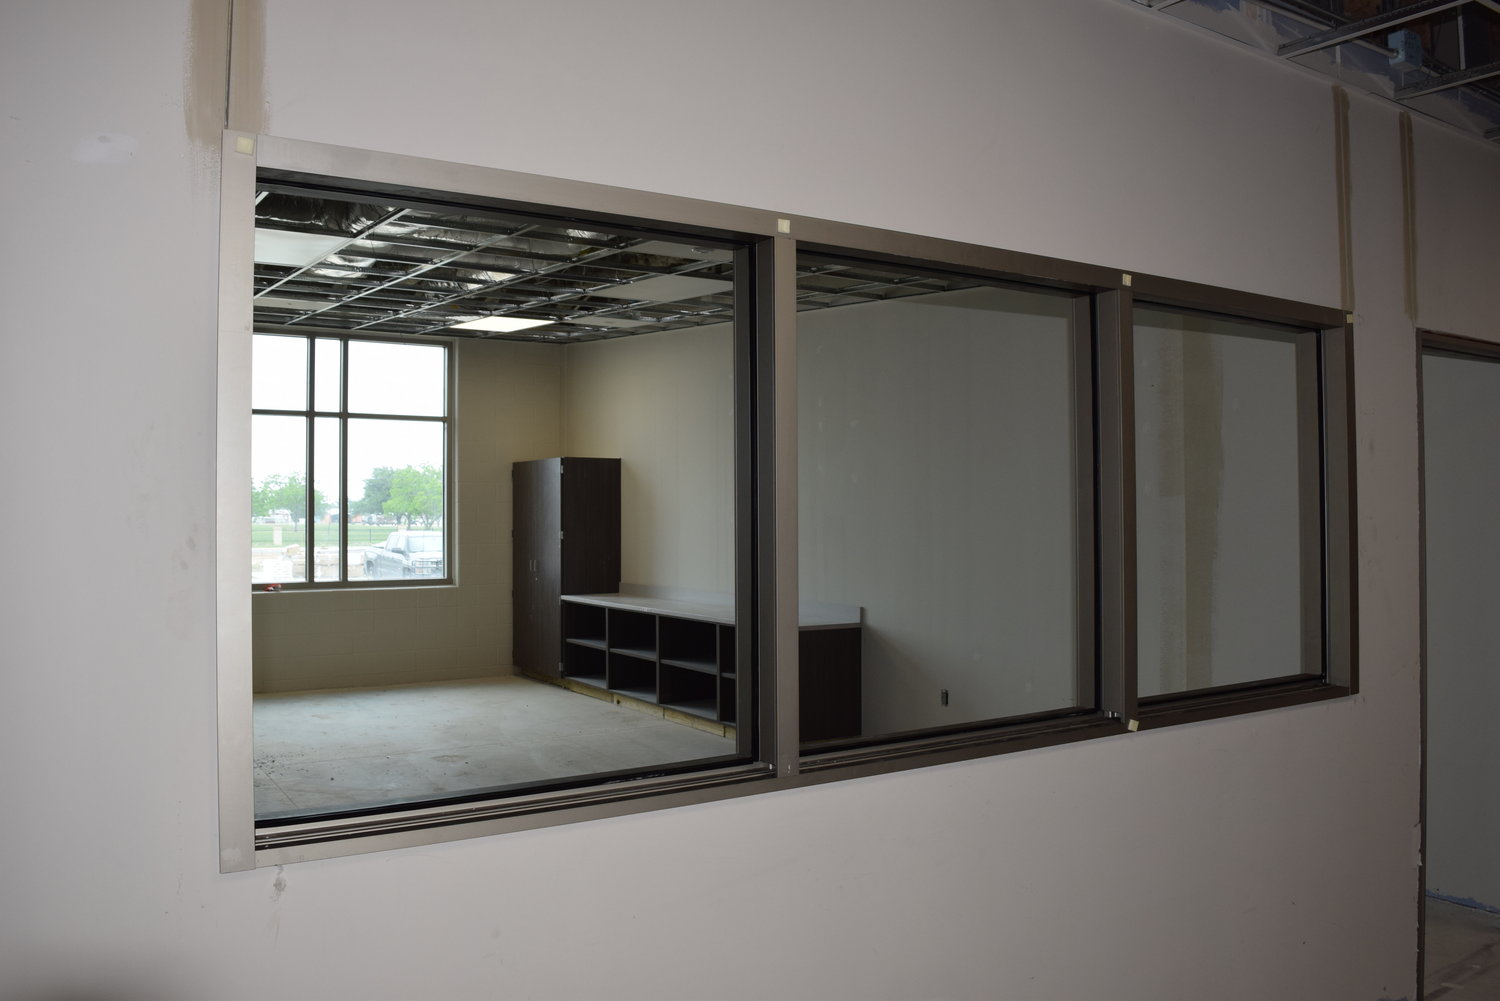 During normal operations, these windows will allow natural light to enter the hallways from outer classrooms at Haskett Junior High School. However, during an emergency the windows will be covered by sliding whiteboards which will keep intruders from looking inside the classrooms, thus improving safety for students.